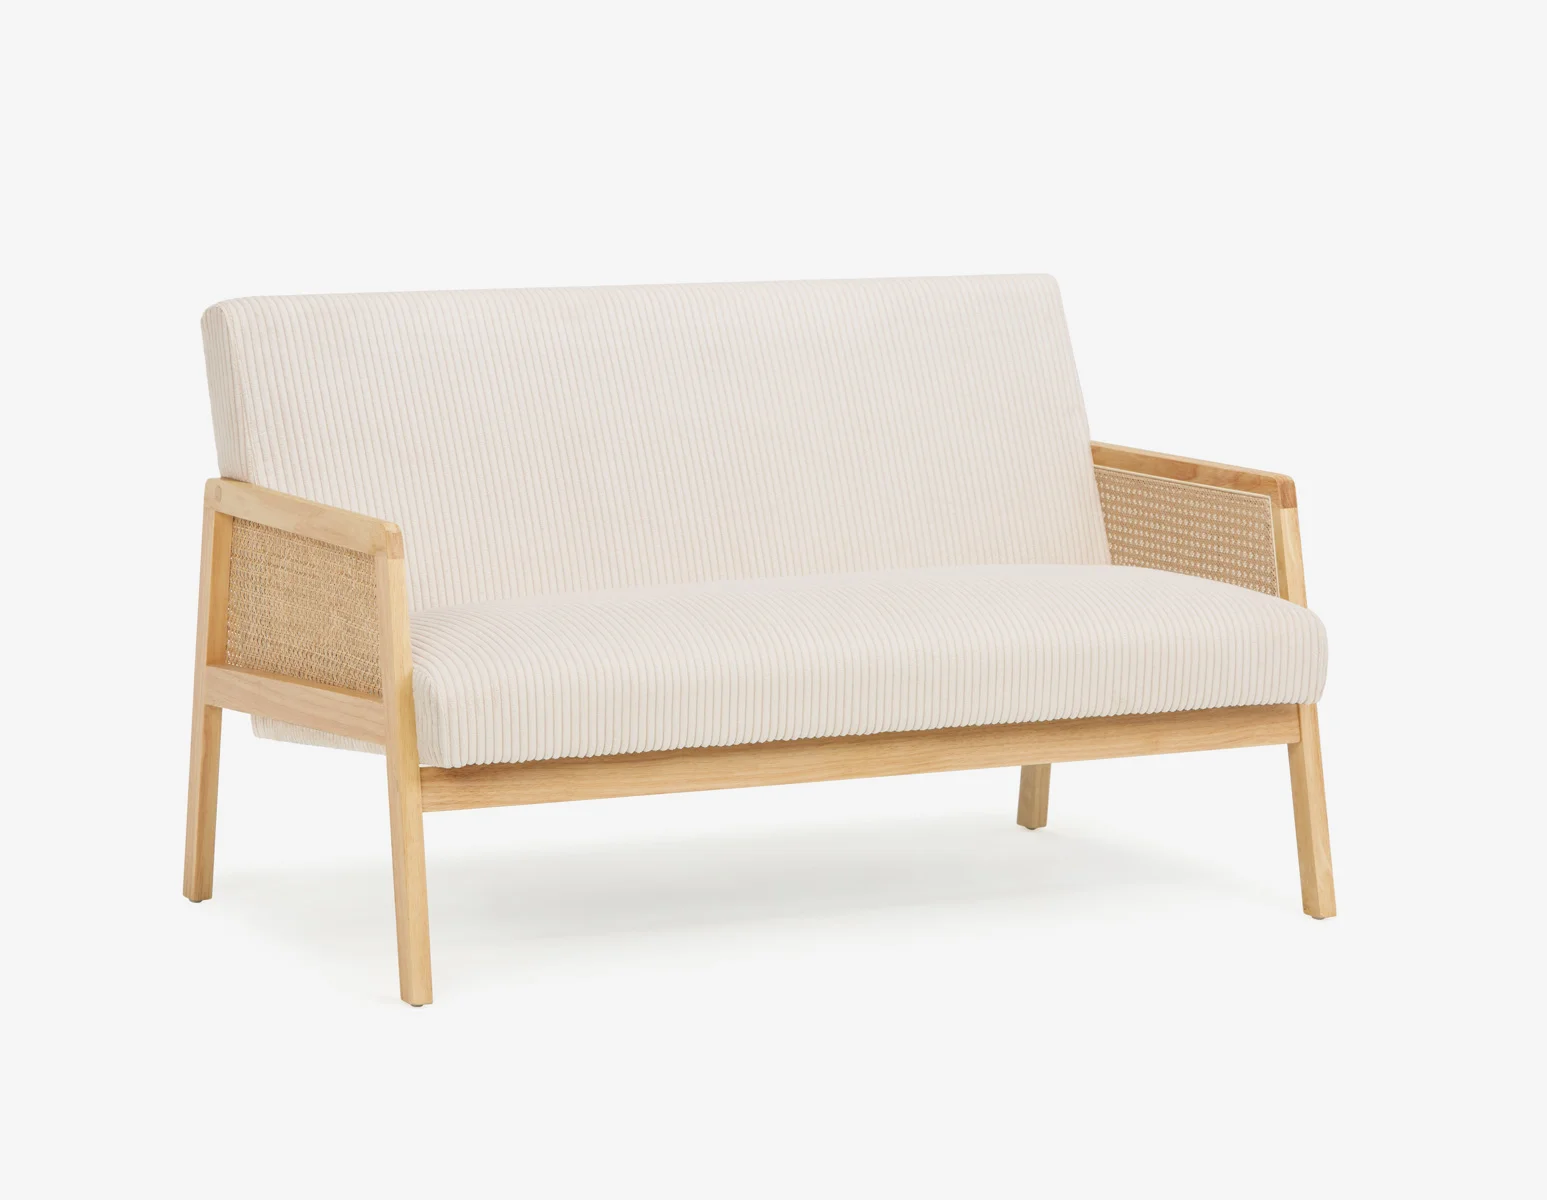 BECKETT loveseat with corduroy and rattan accents